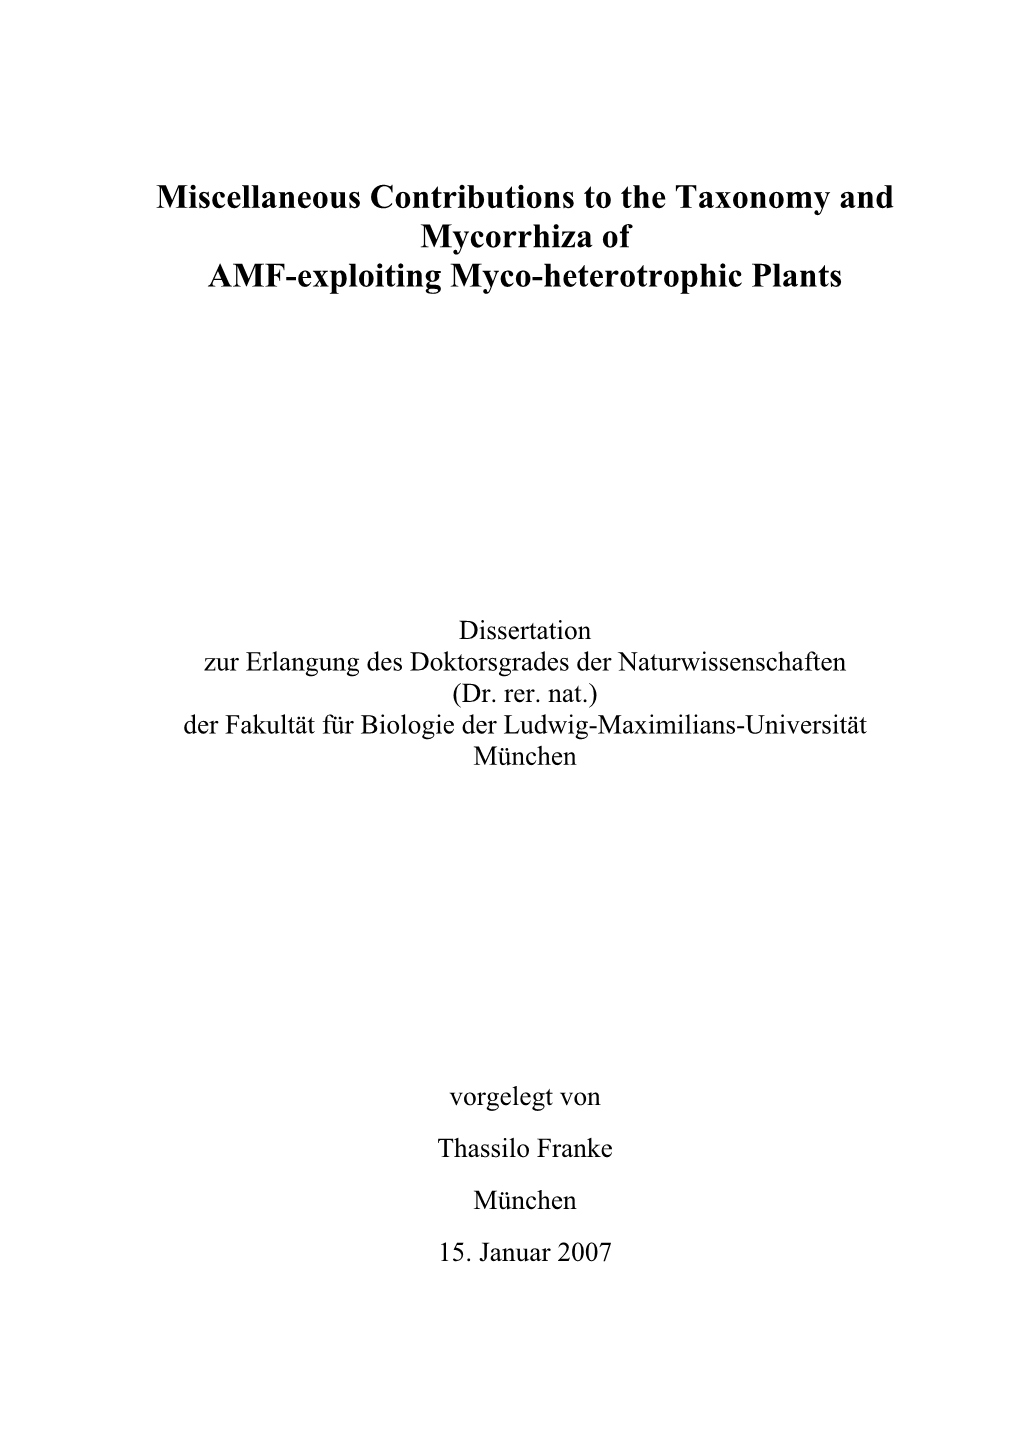 Miscellaneous Contributions to the Taxonomy and Mycorrhiza of AMF-Exploiting Myco-Heterotrophic Plants